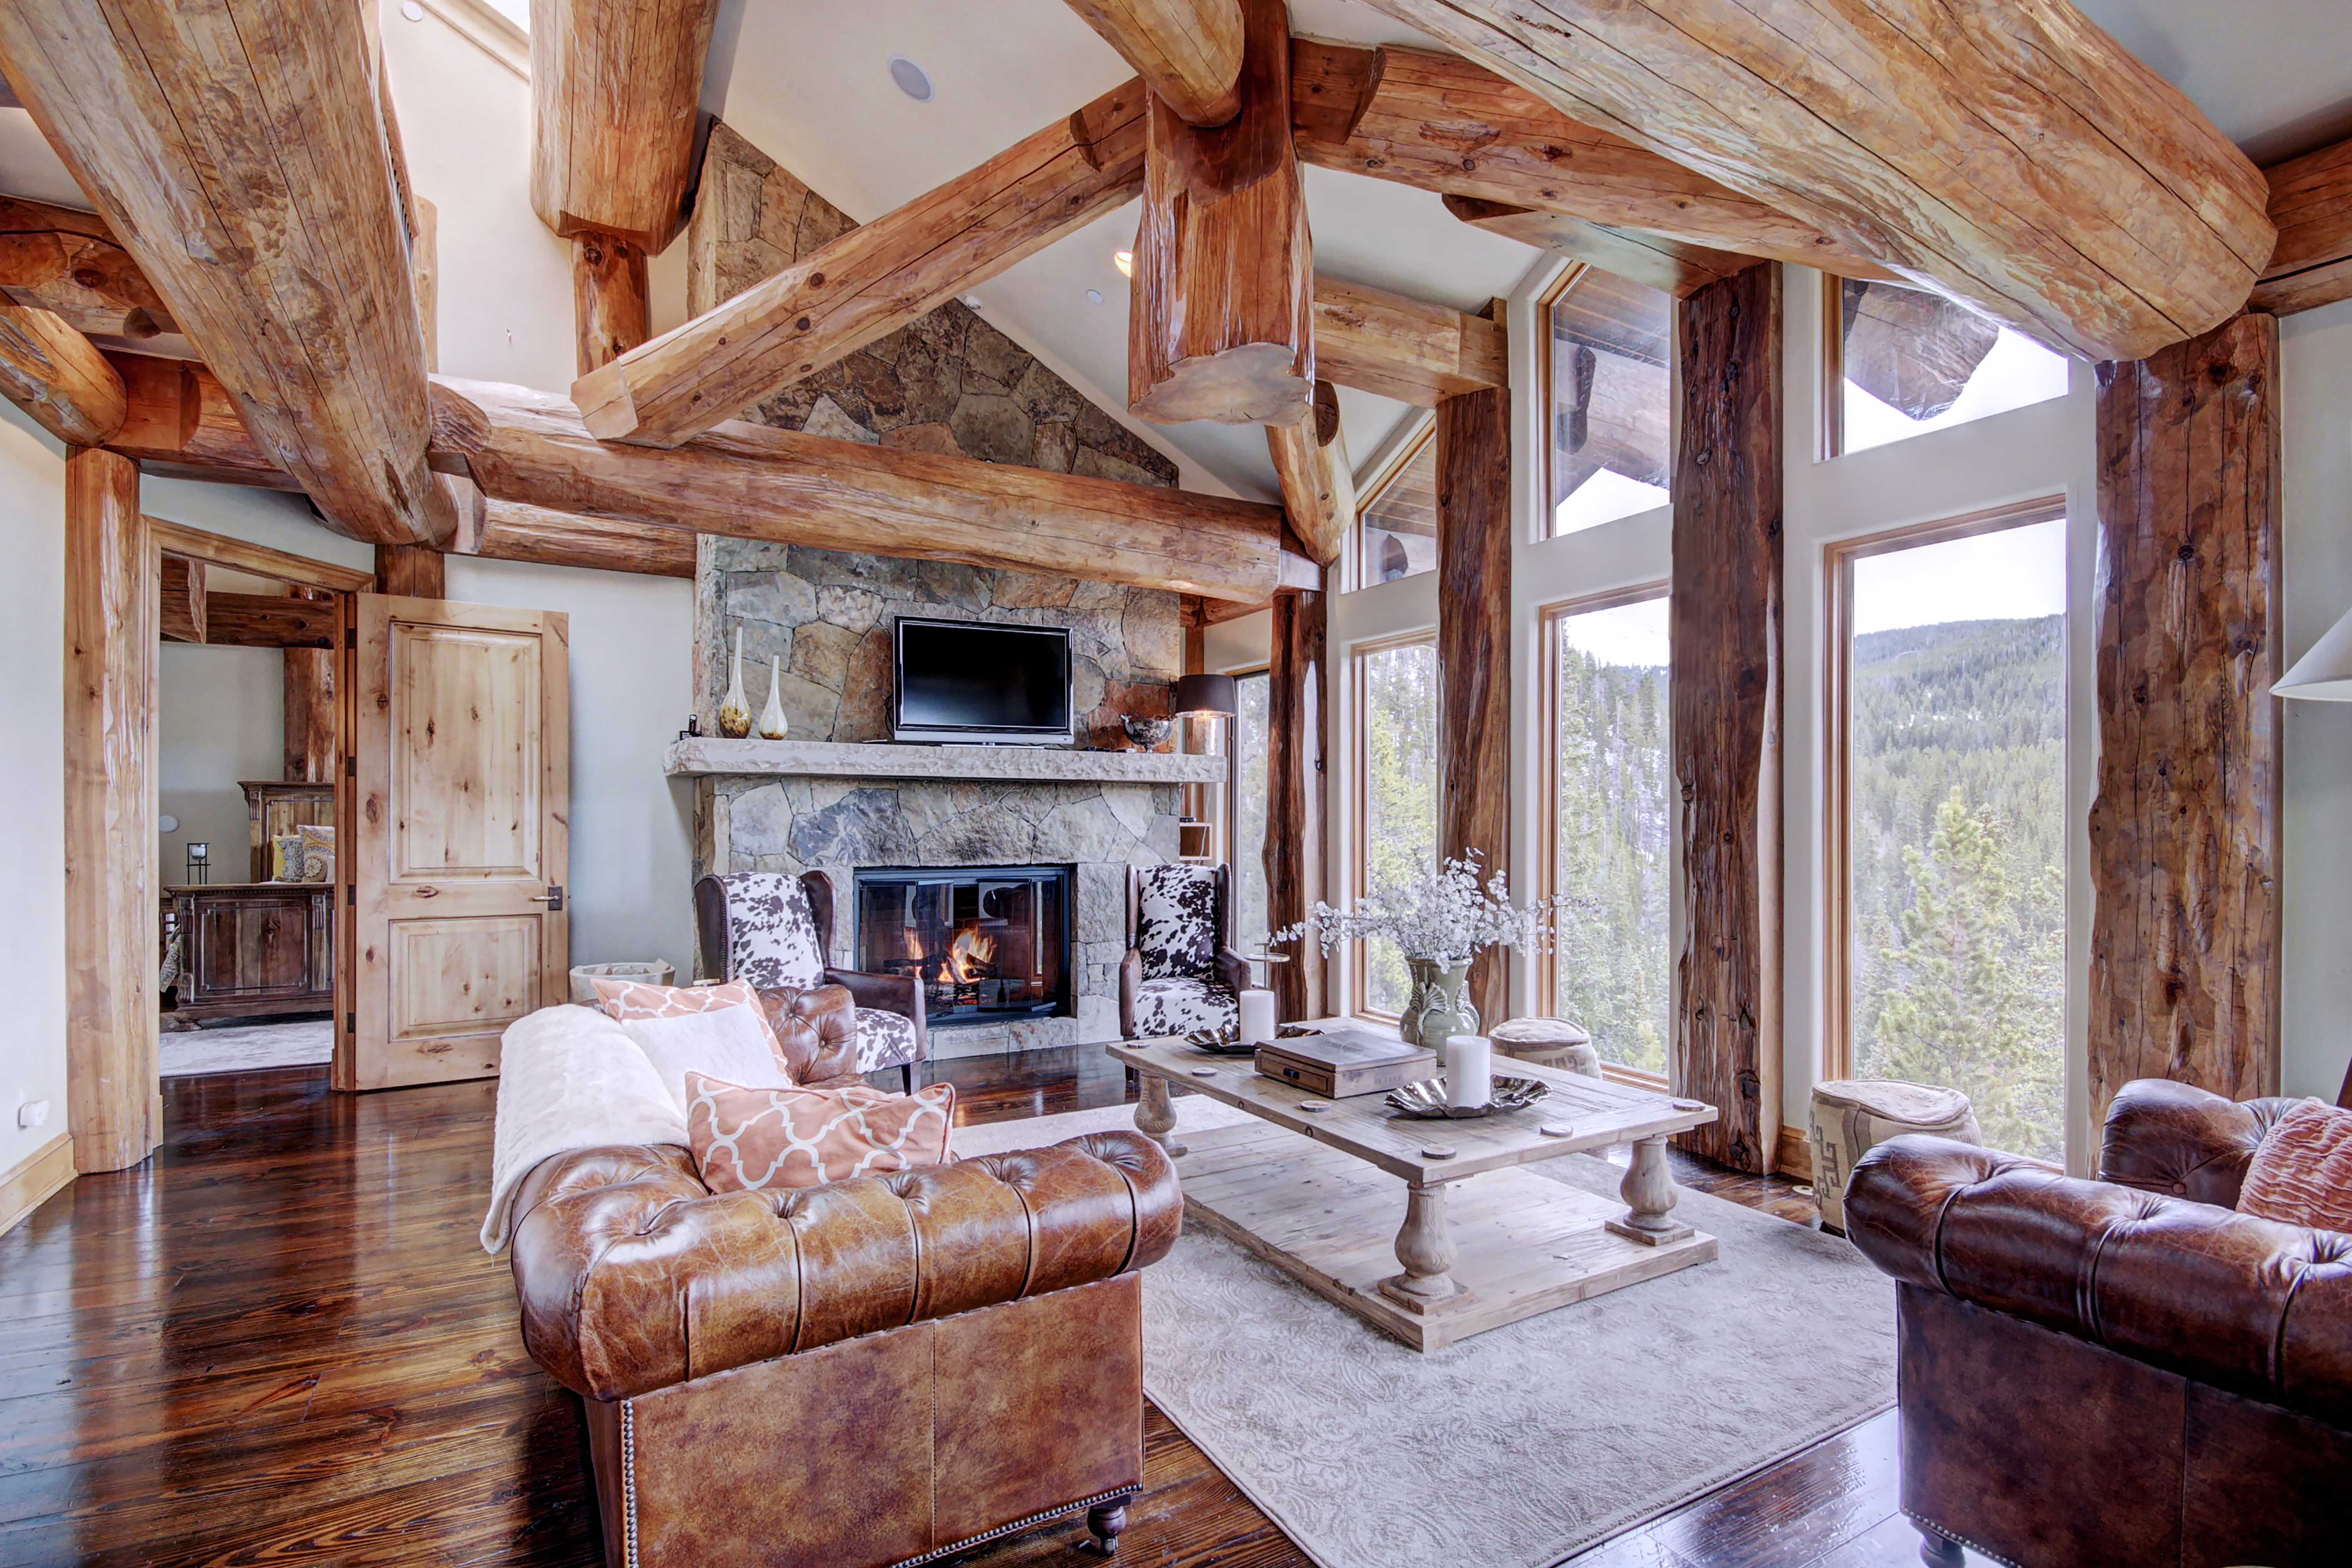 Living area with ample natural light - Clowsgill Holme Breckenridge Vacation Rental